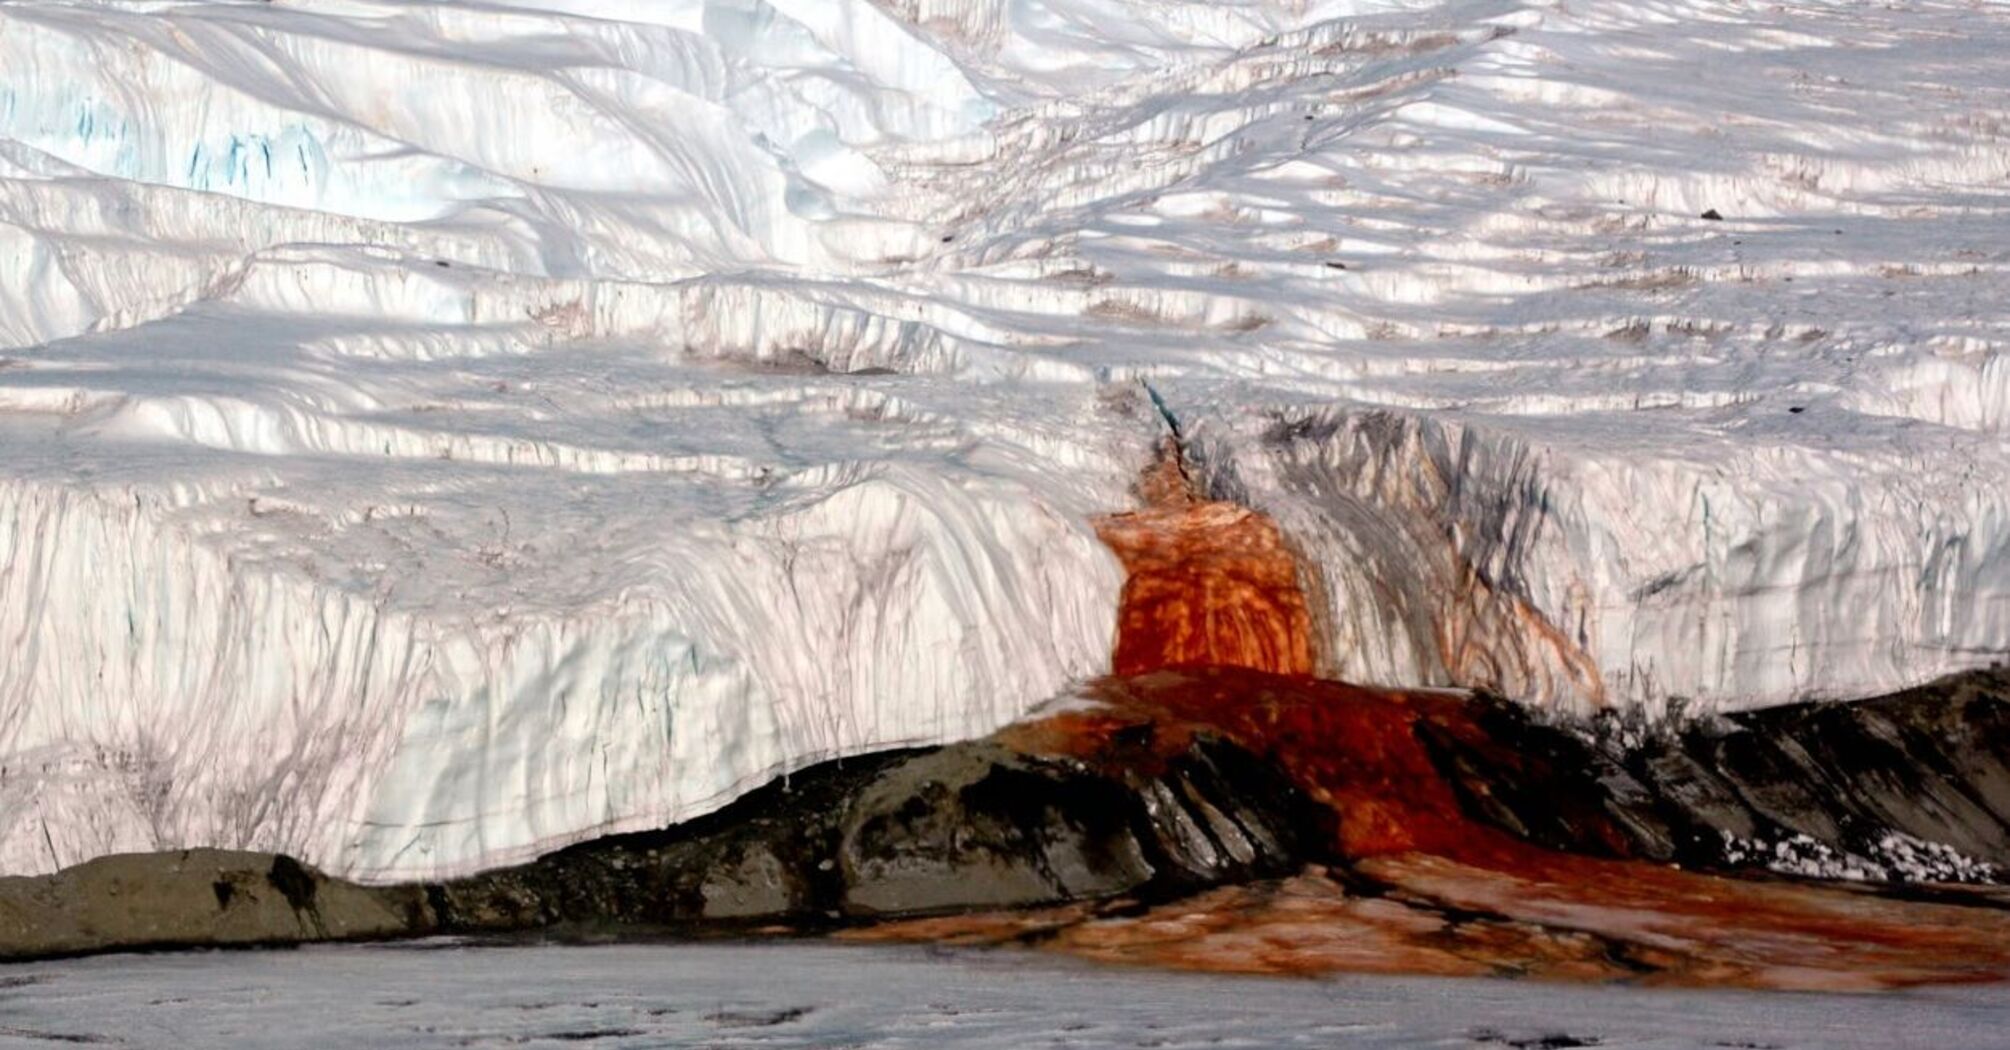 Scientists reveal the secret of the Blood Falls in Antarctica (video)